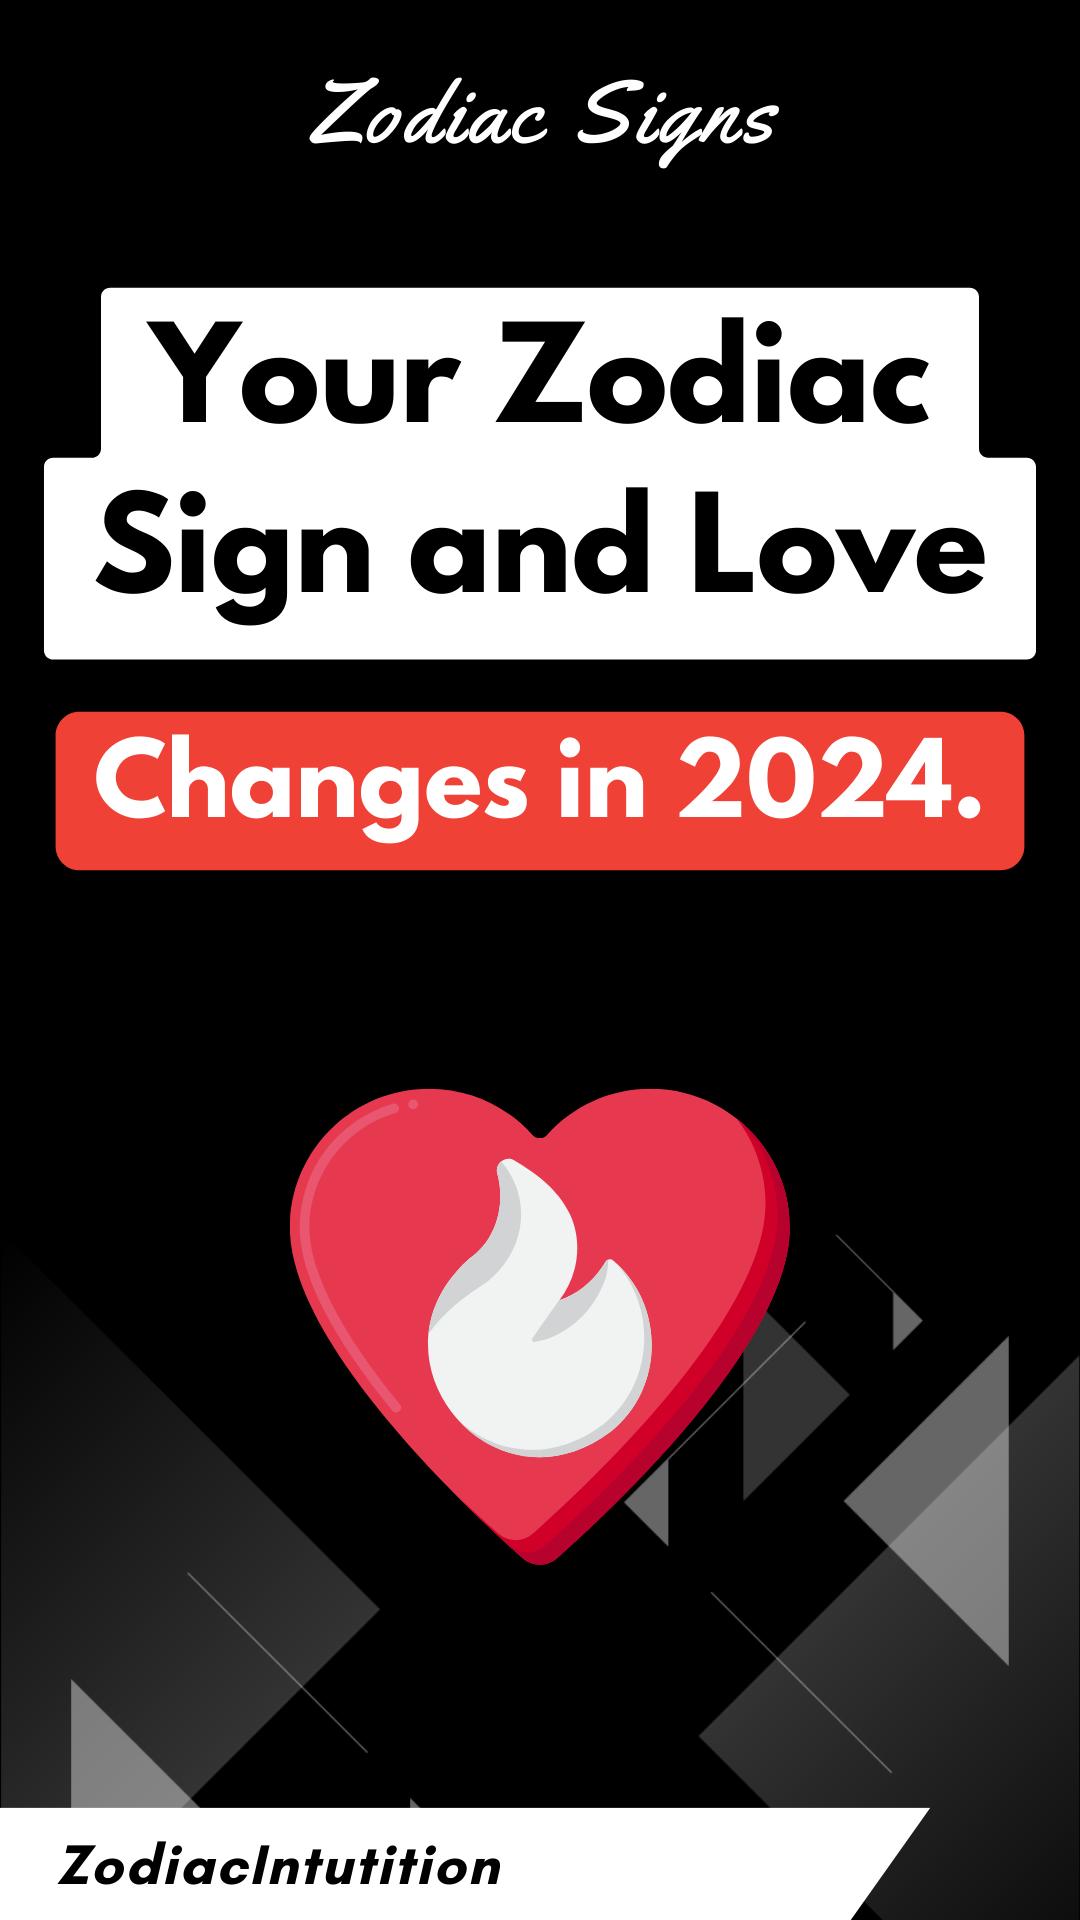 Your Zodiac Sign and Love Changes in 2024.